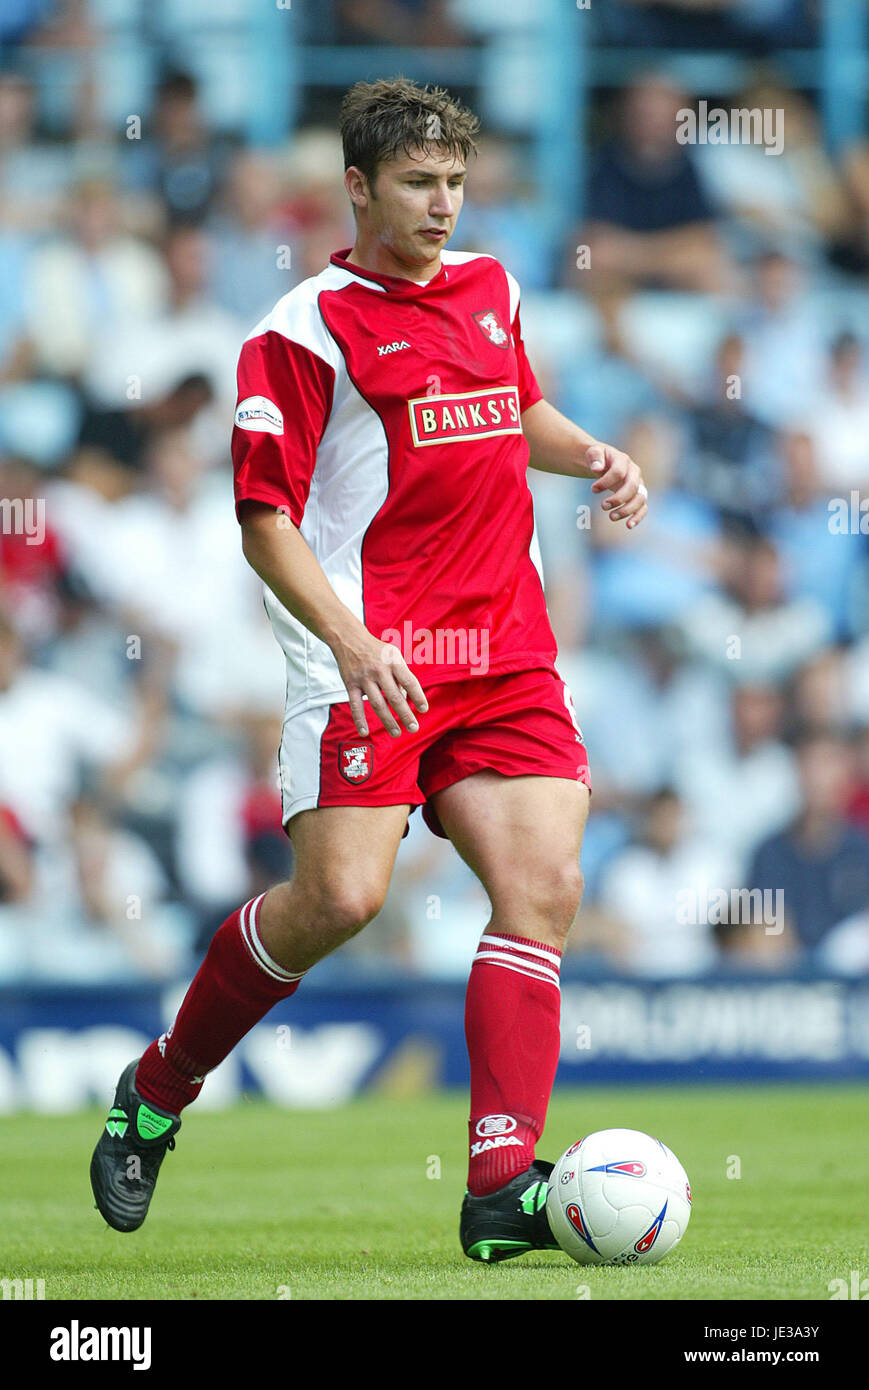 IAN ROPER WALSALL FC HIGHFIELD ROAD COVENTRY 16. August 2003 Stockfoto